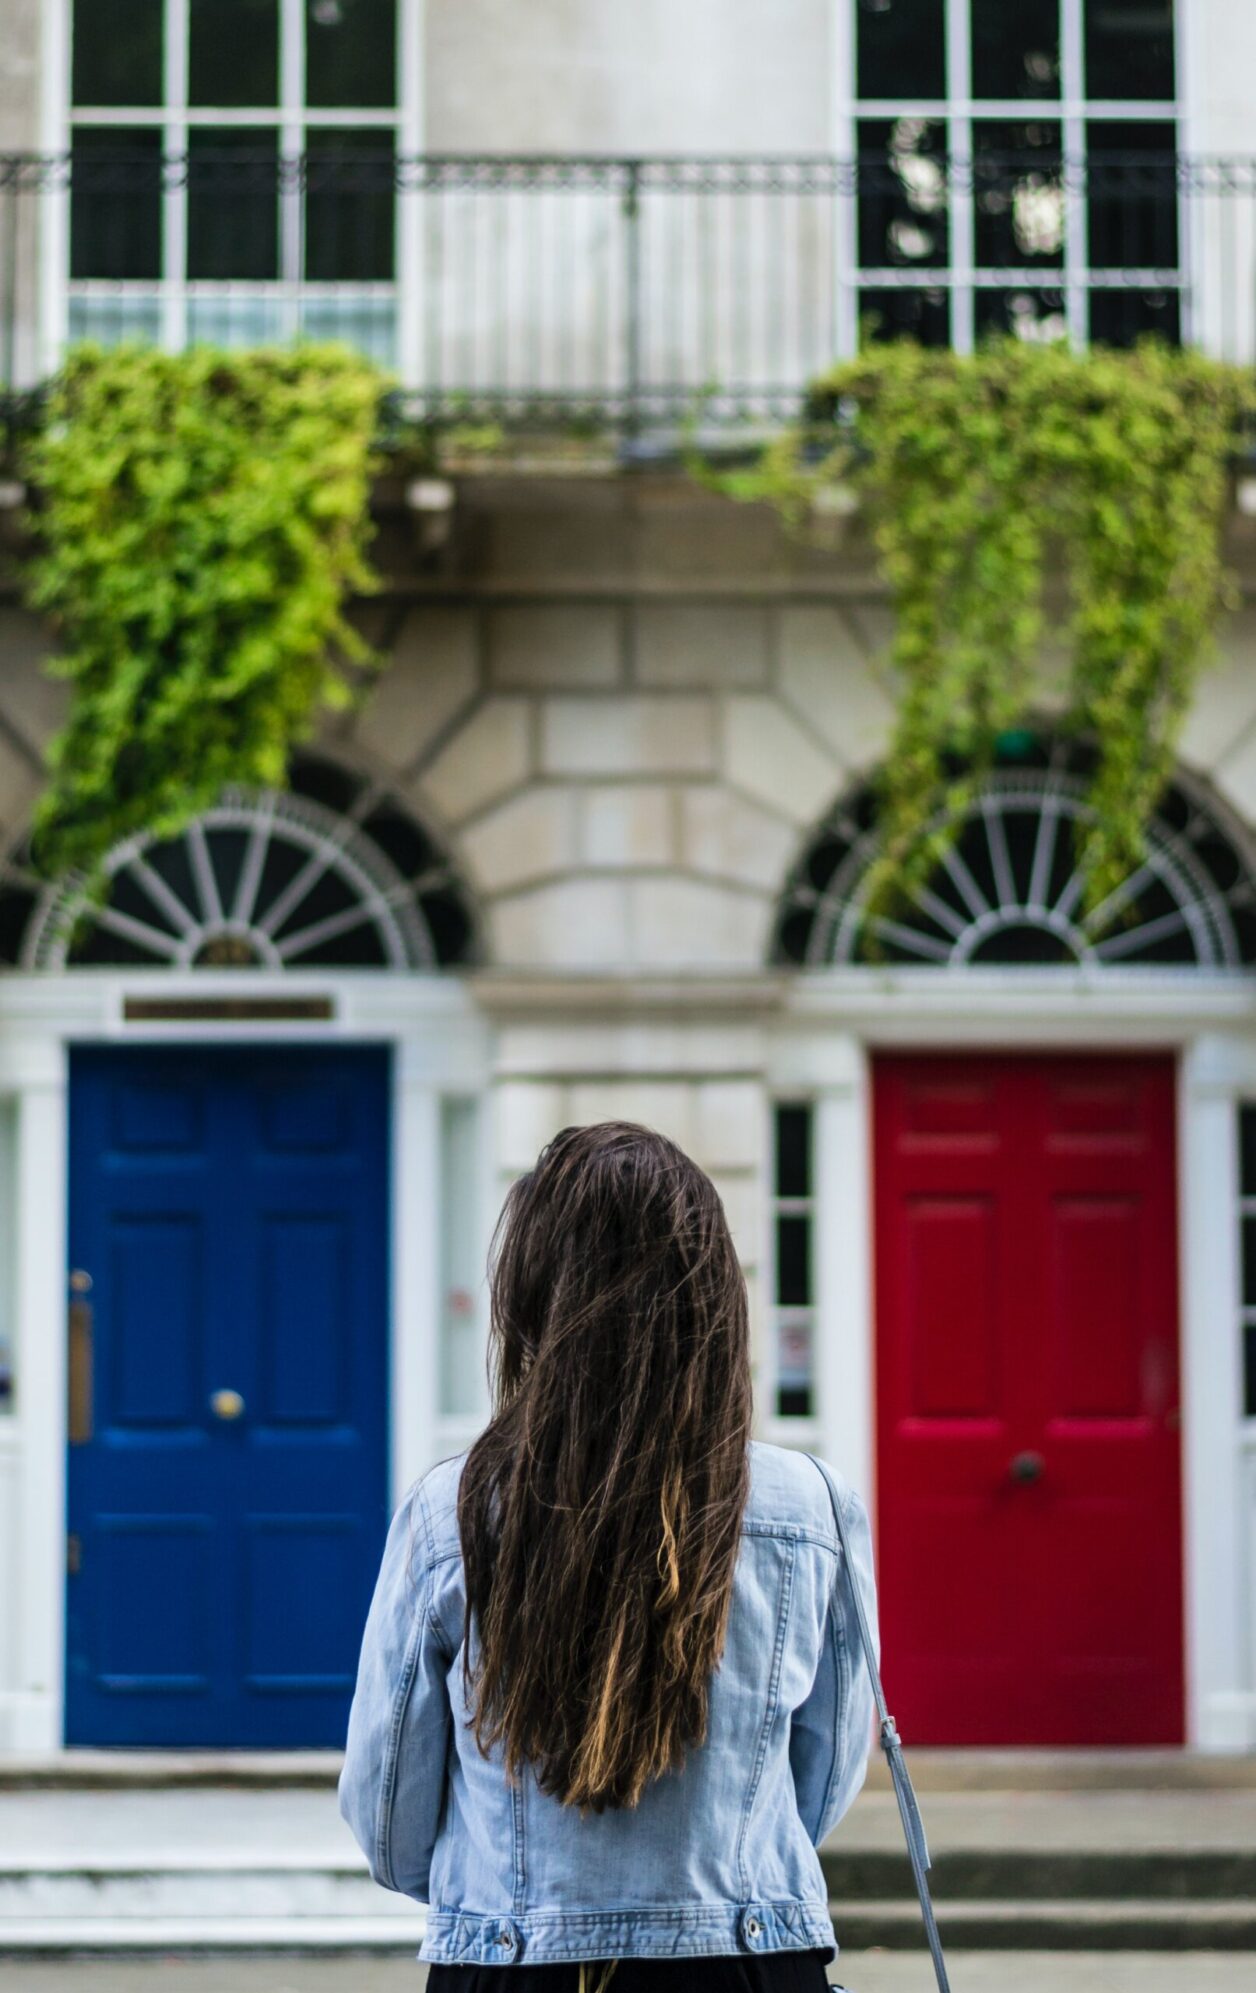 A woman in a denim jacket stands across the street from white stone rowhouses with a blue door and a red door with balconies above that have greenery